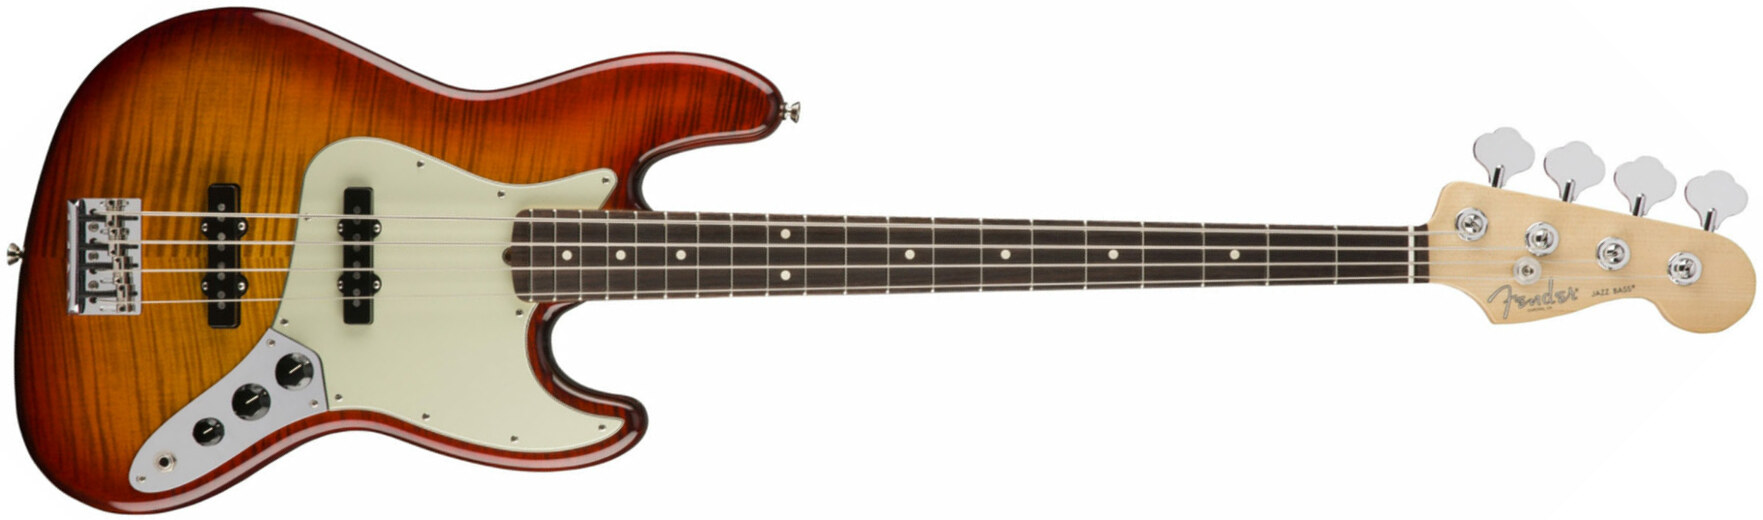 Fender Jazz Bass Fmt American Professional 2017 Ltd Usa Rw - Antique Cherry Burst - Solid body electric bass - Main picture